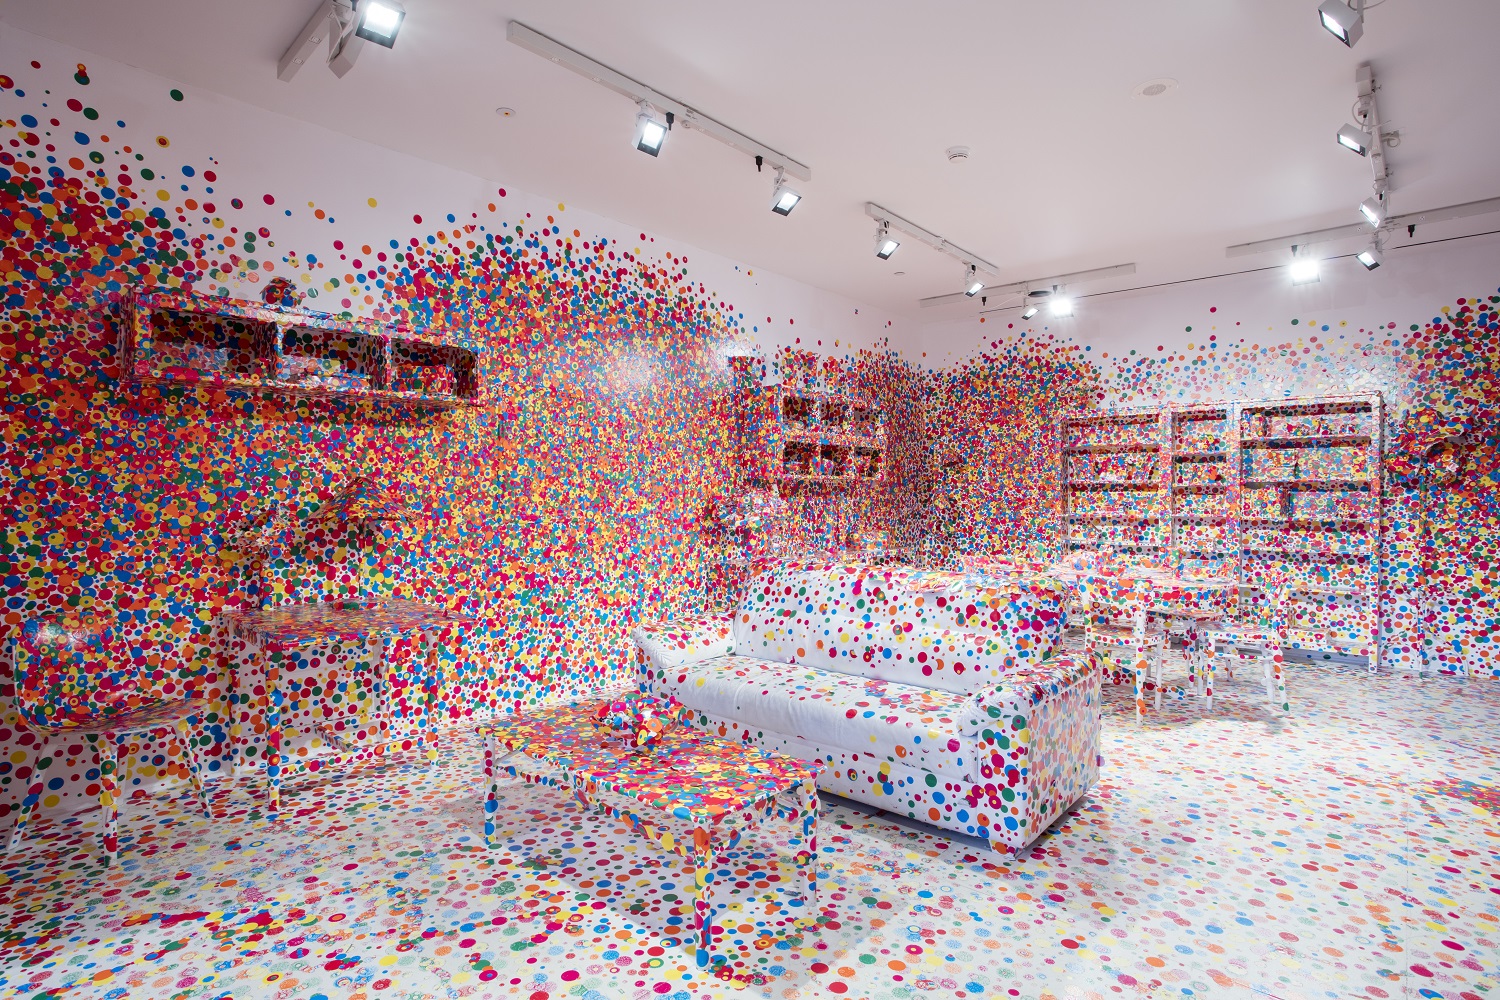 A living room covered in bright polka dots as part of Yayoi Kusama's The Obliteration Room.